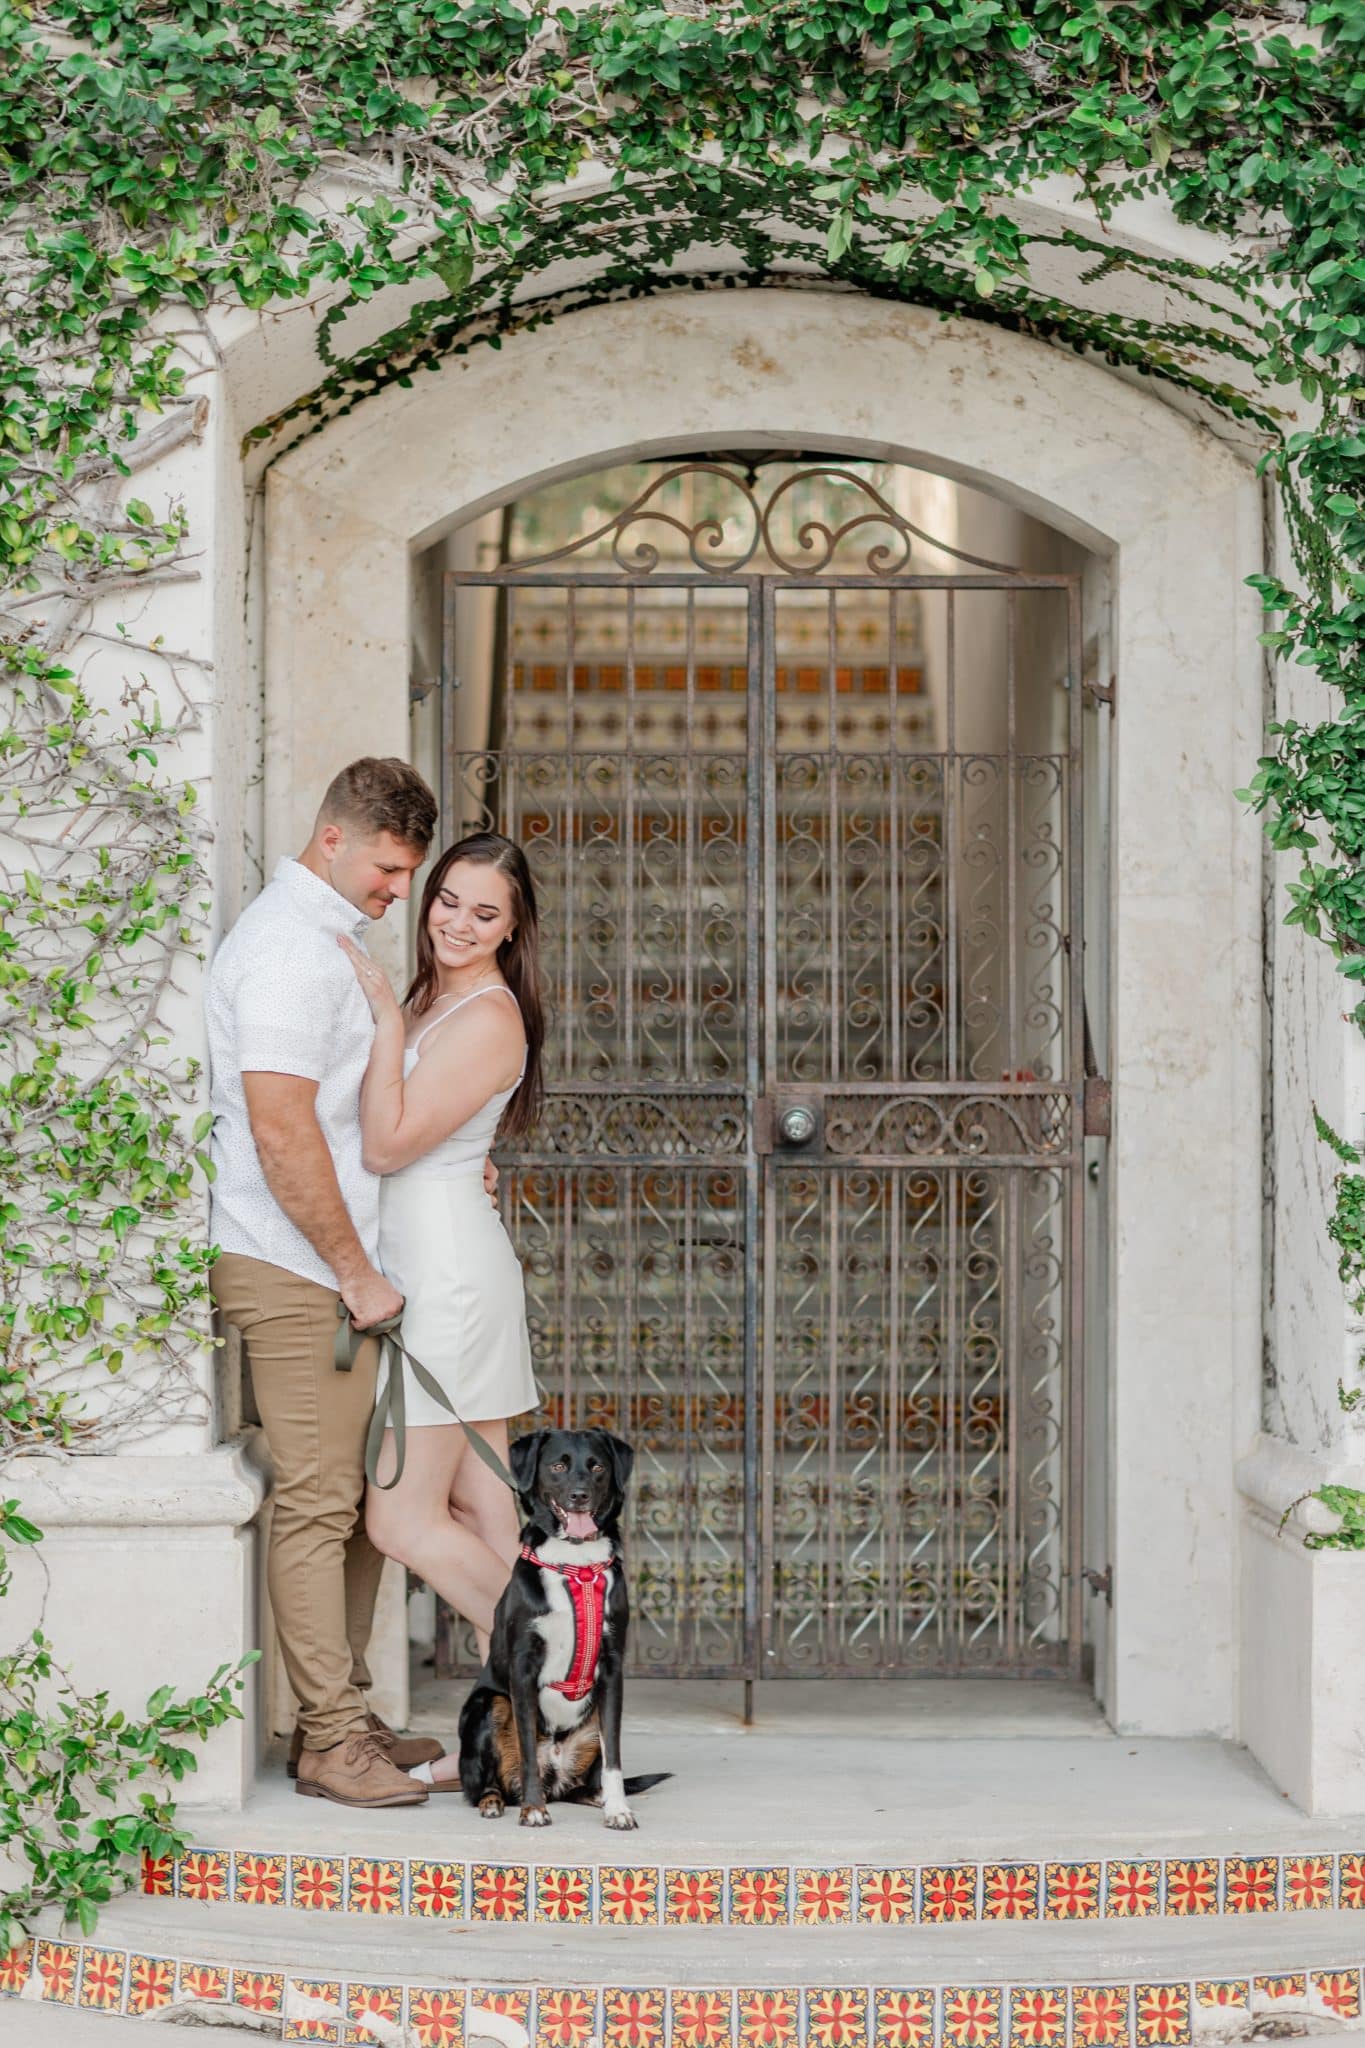 couple posing for picture with dog in front of wrought iron gate doorway